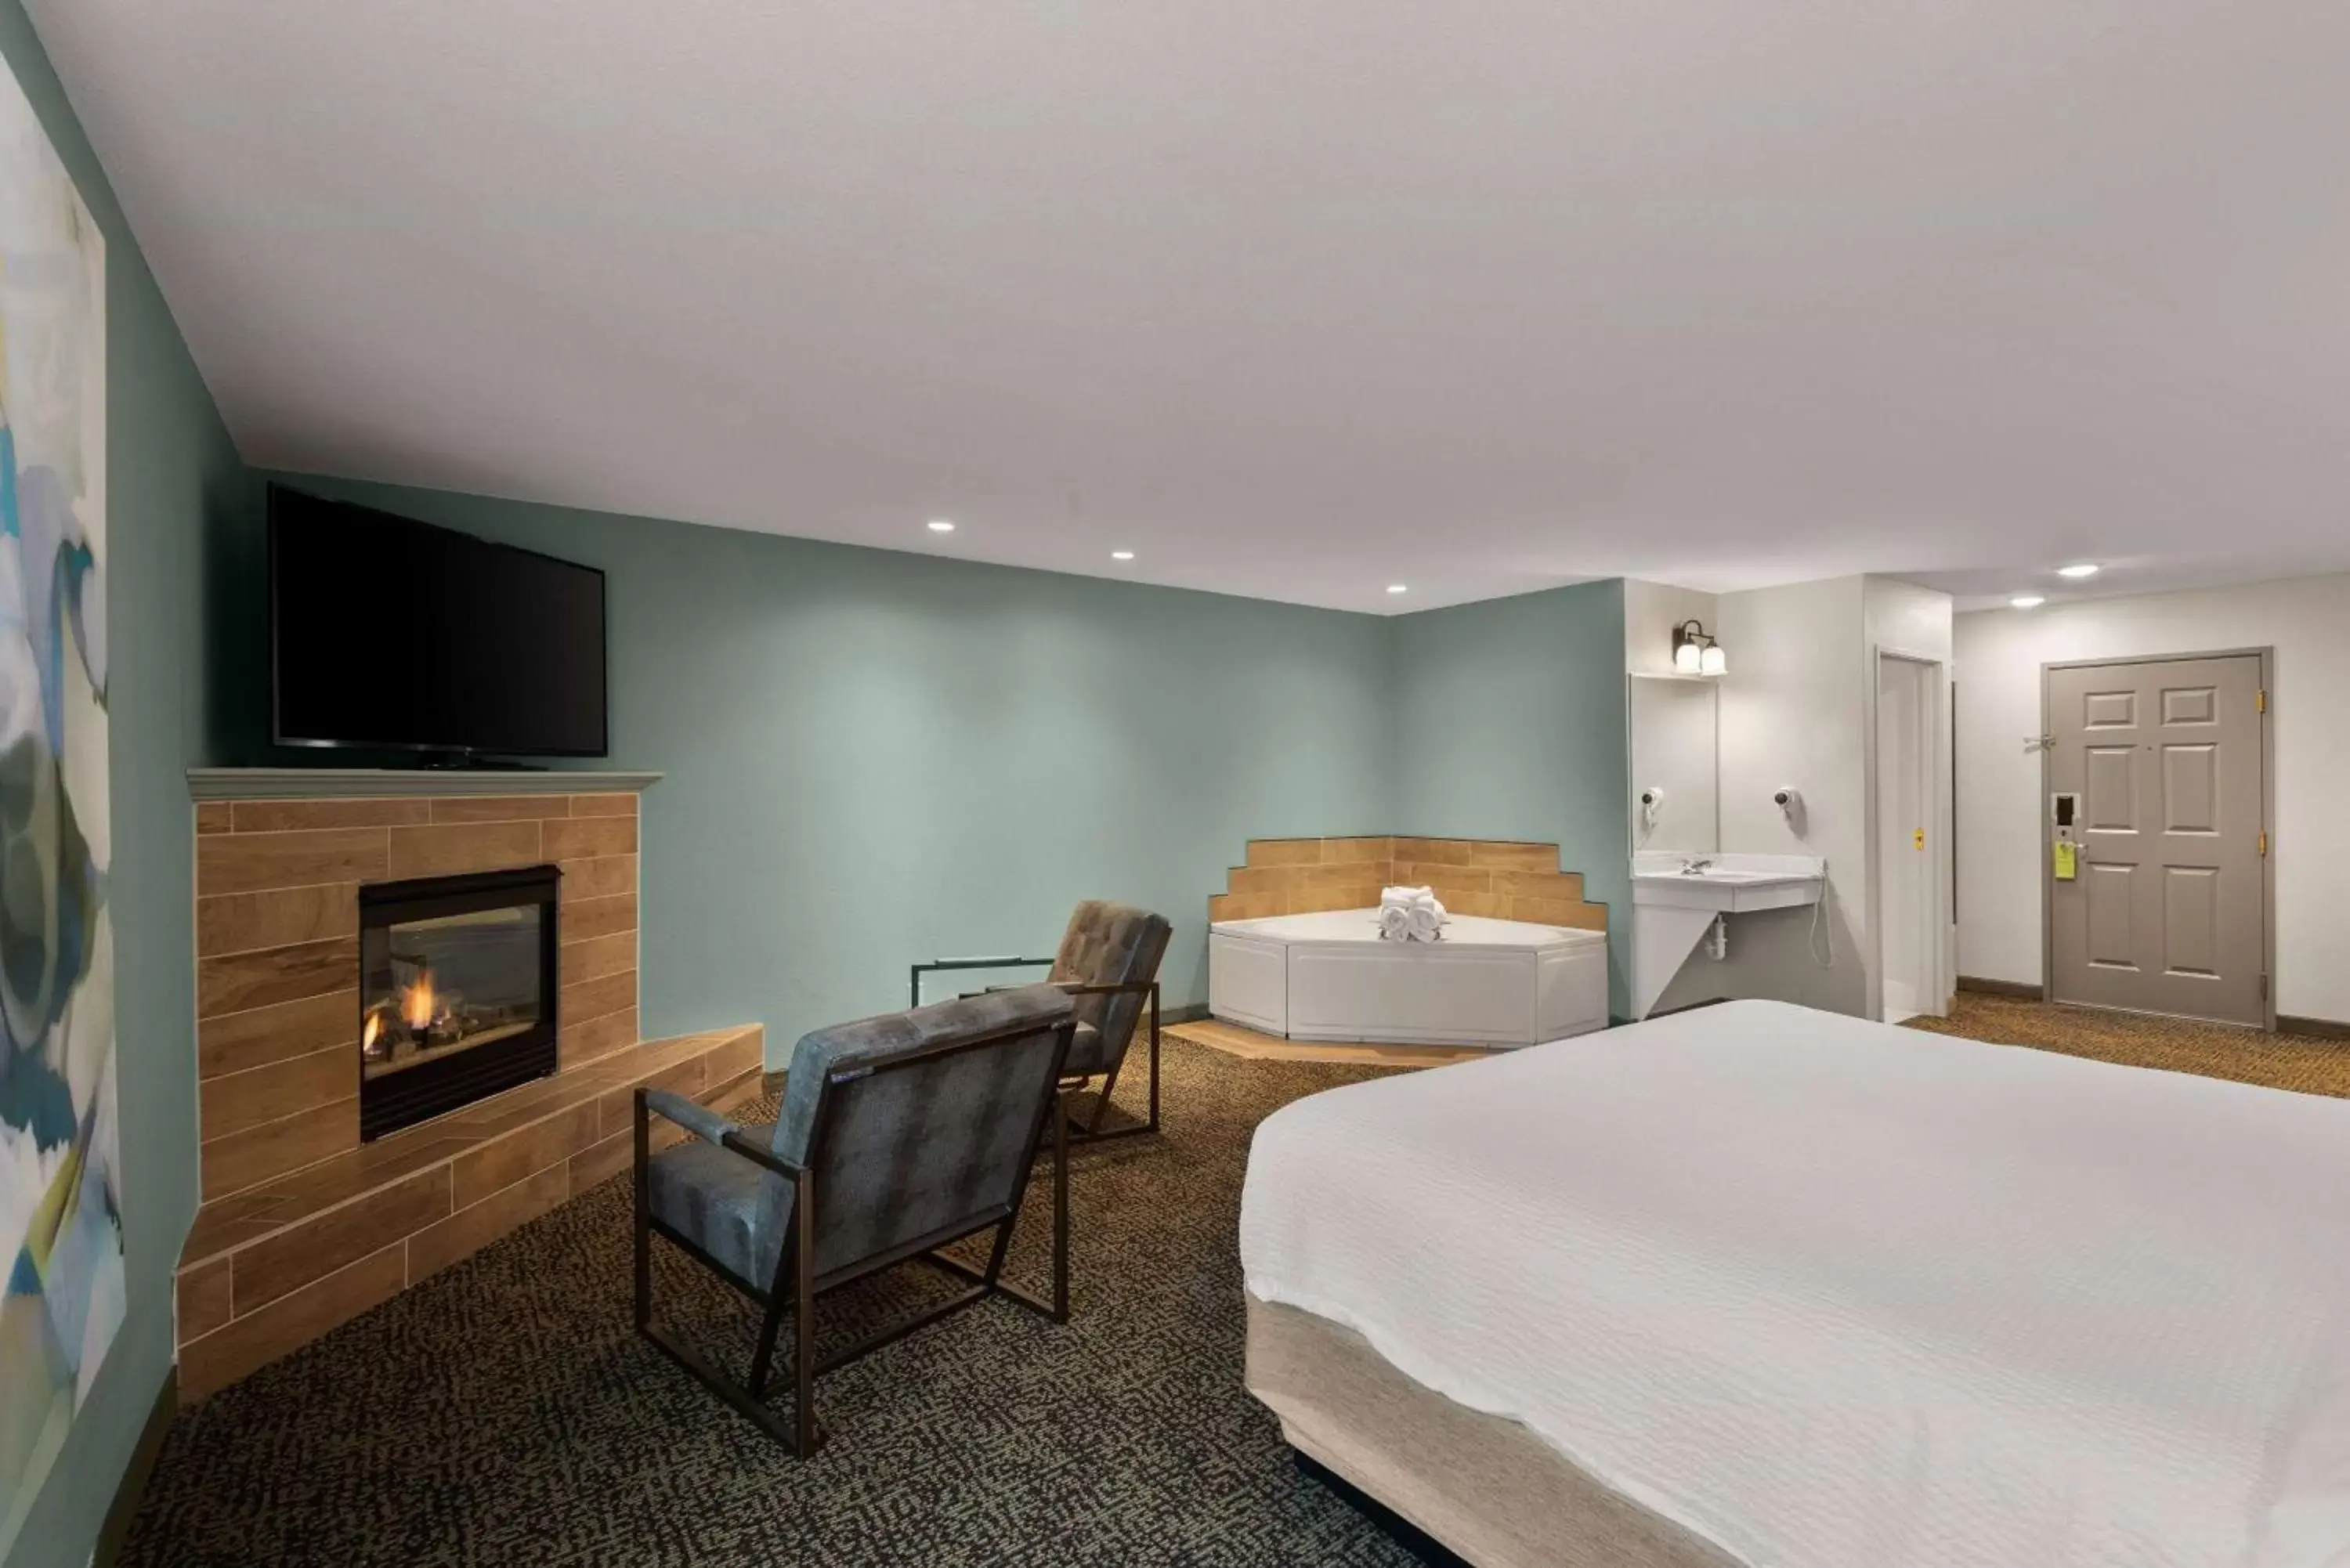 Garden King Suite with Fireplace and Jetted Tub - Non-Smoking in Wyndham Garden Galena Hotel & Day Spa